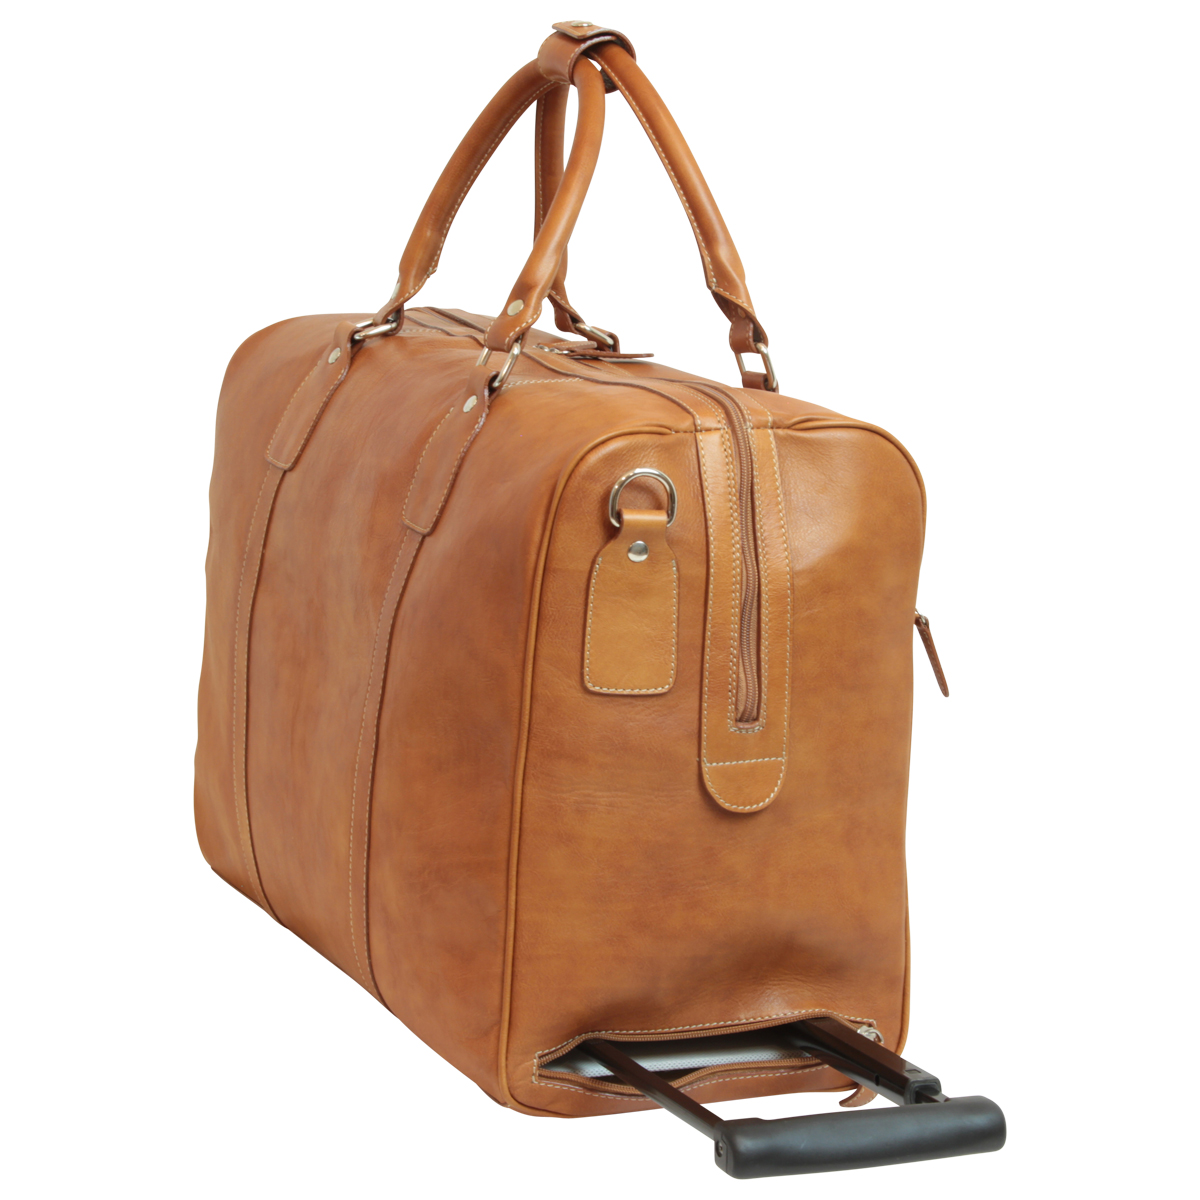 Oiled Calfskin leather duffel bag - Colonial Brown | 001561CO | EURO | Old Angler Firenze